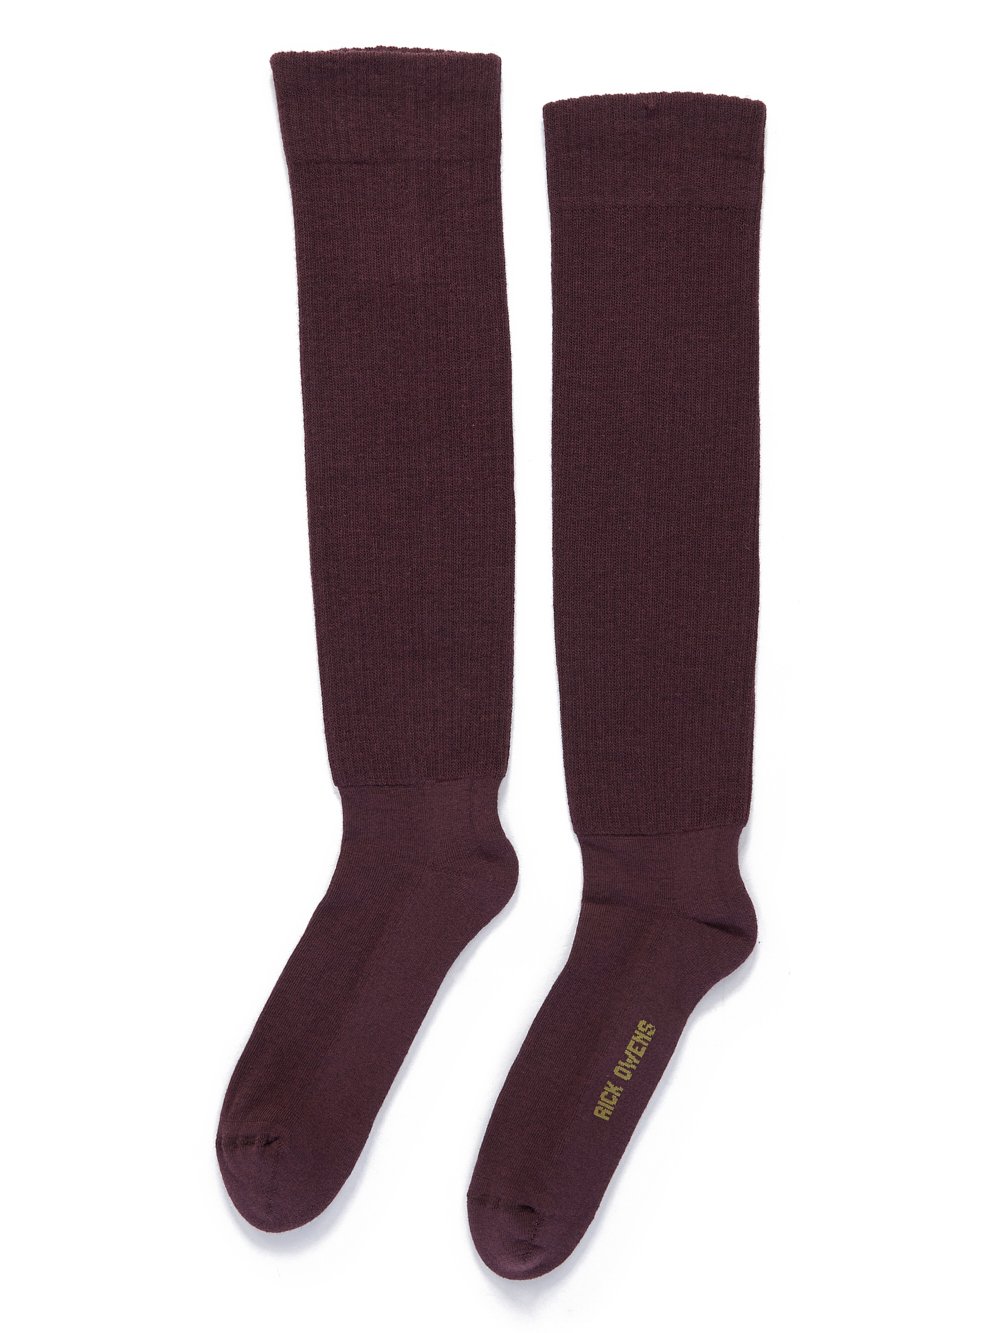 RICK OWENS FW23 LUXOR KNEE HIGH SOCKS IN AMETHYST AND ACID COTTON KNIT